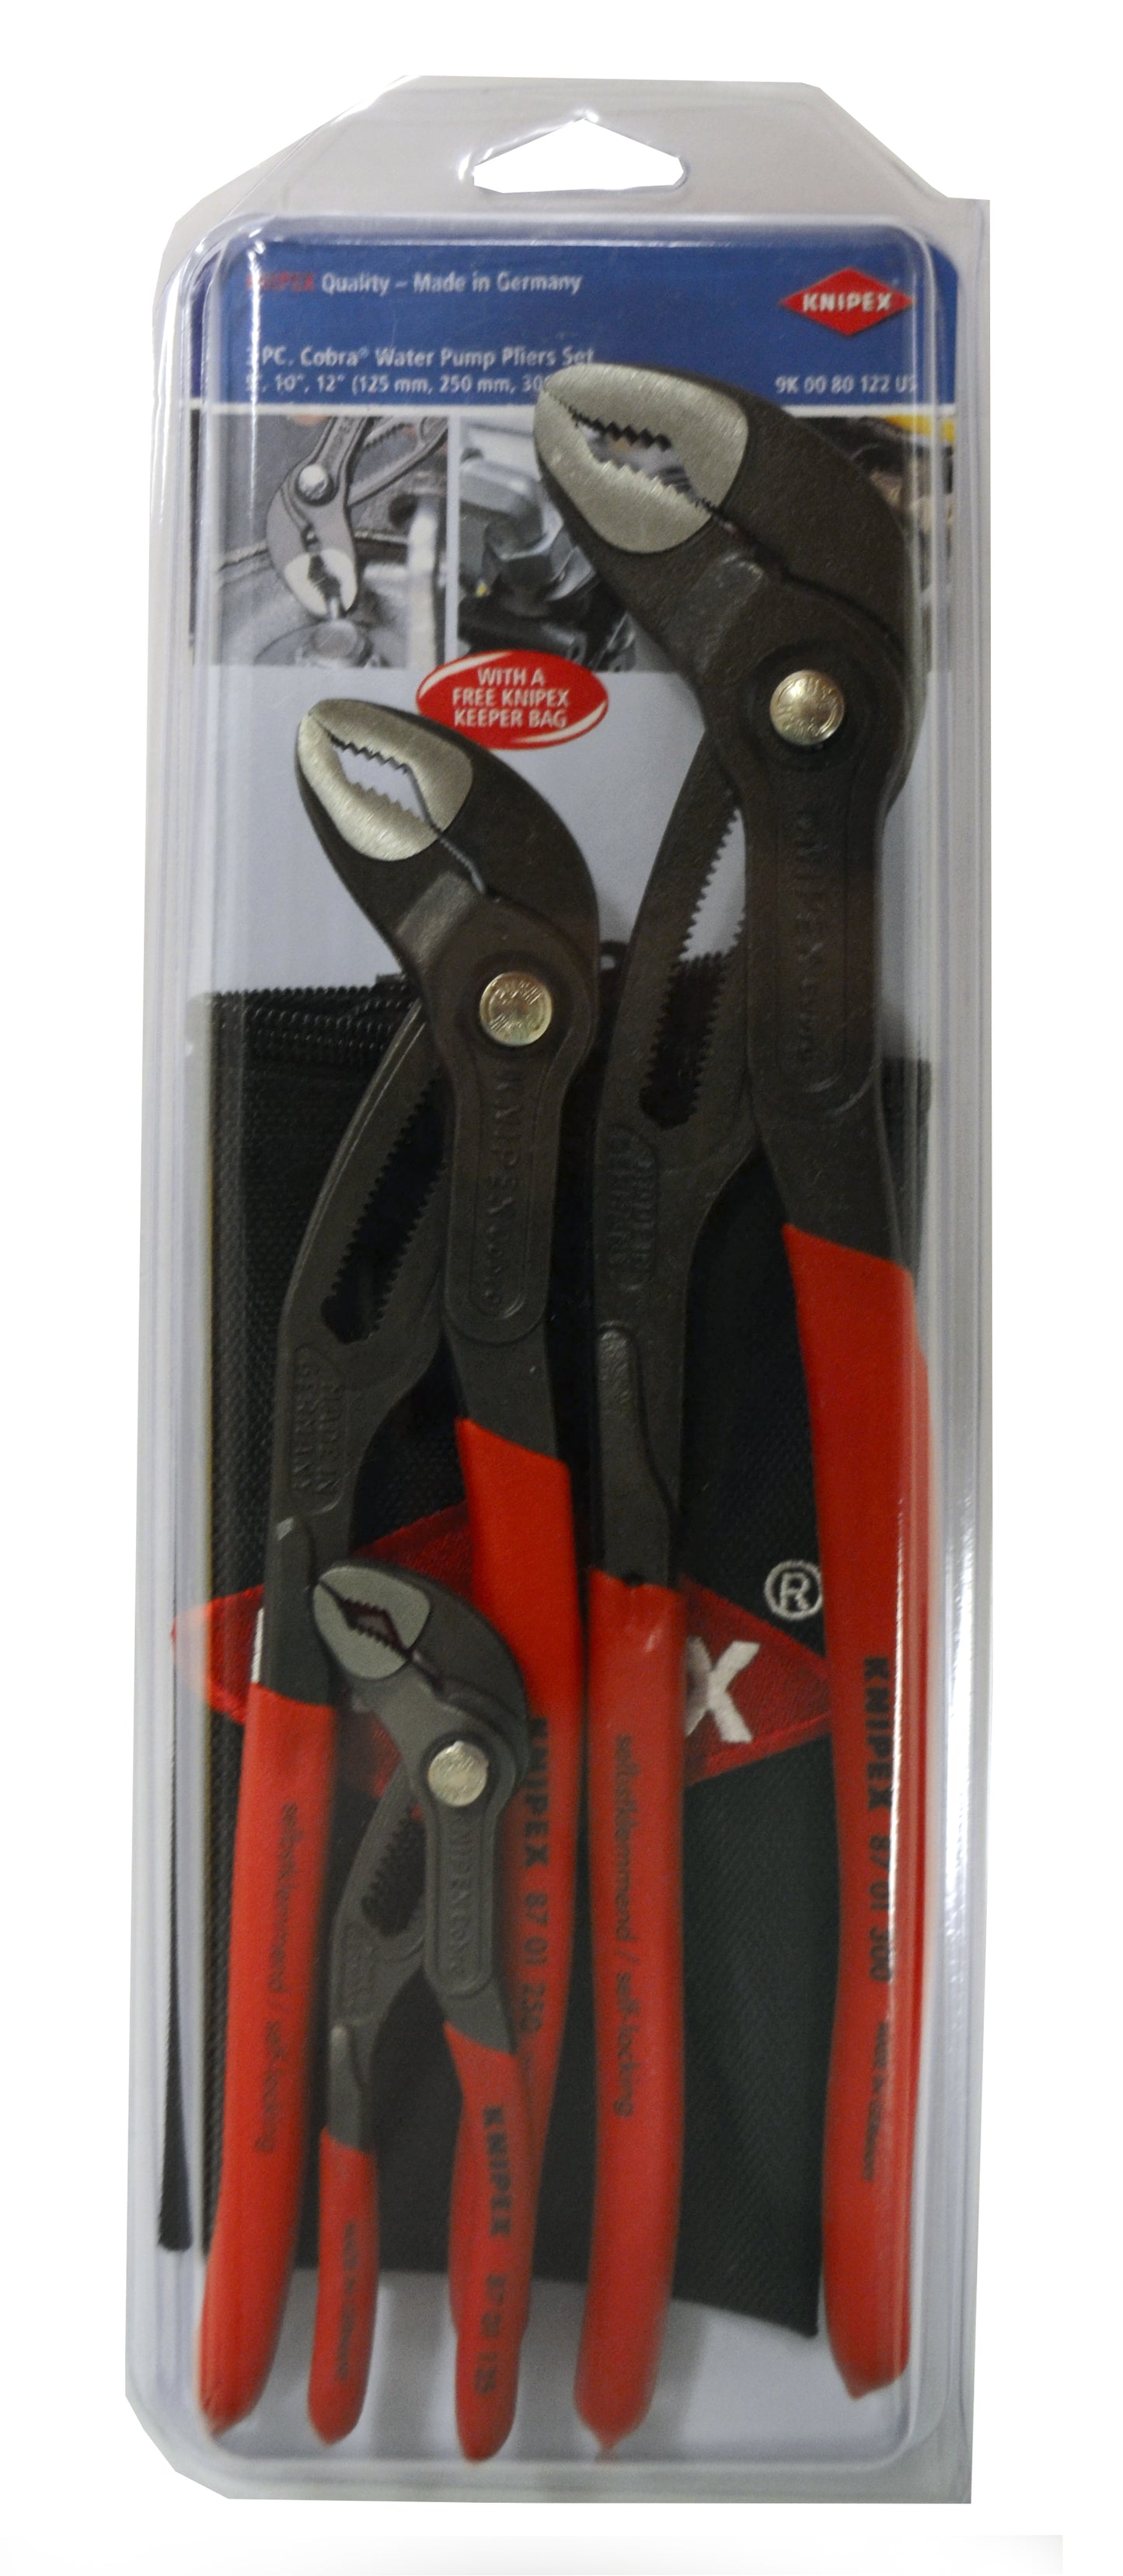 knipex cobra® water pump pliers set with pouch 3 piece 9k 00 80 122 us